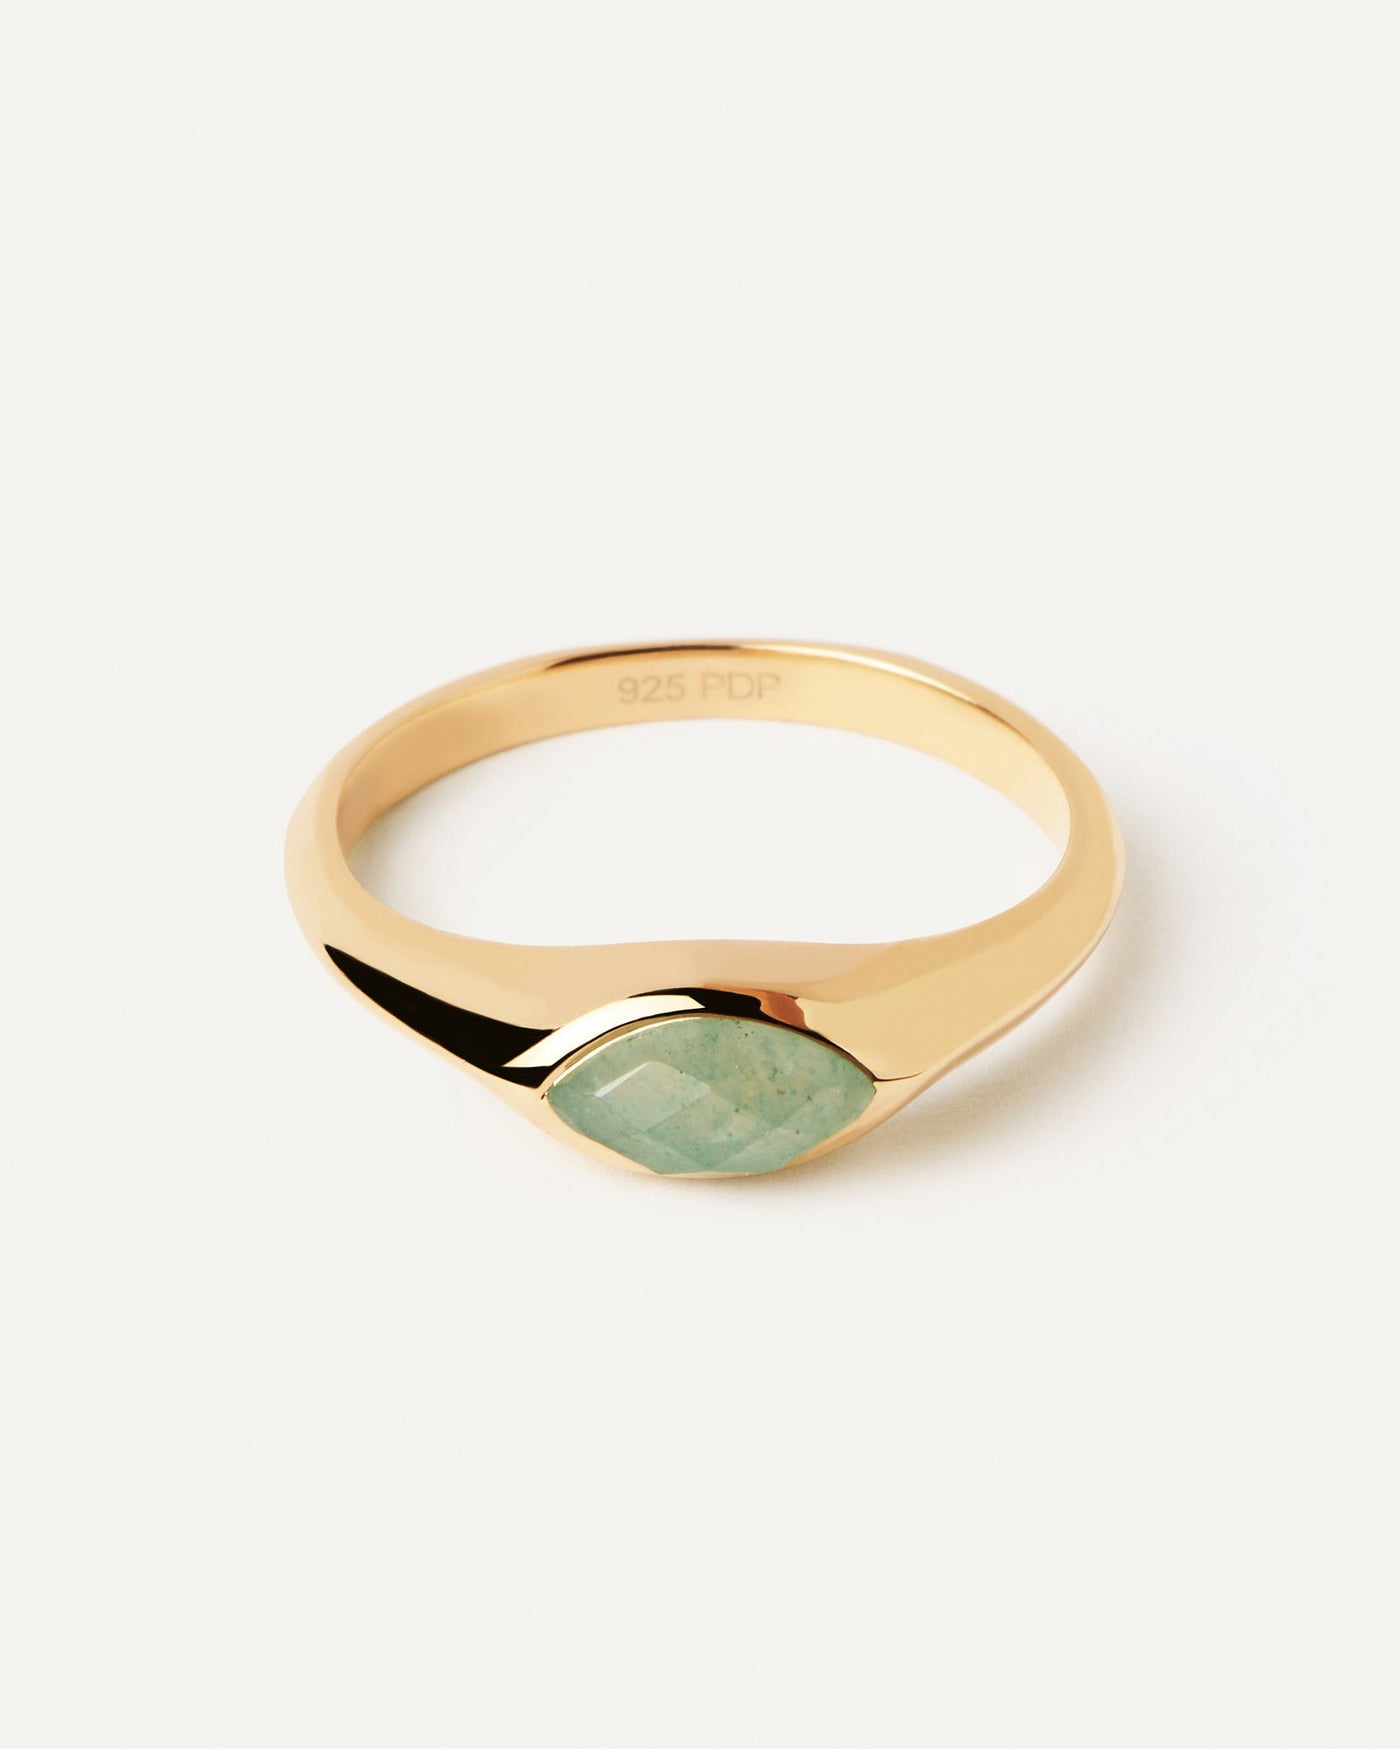 2024 Selection | Green Aventurine Nomad Stamp Ring. Gold-plated signet ring embellished with marquise cut green gemstone. Get the latest arrival from PDPAOLA. Place your order safely and get this Best Seller. Free Shipping.